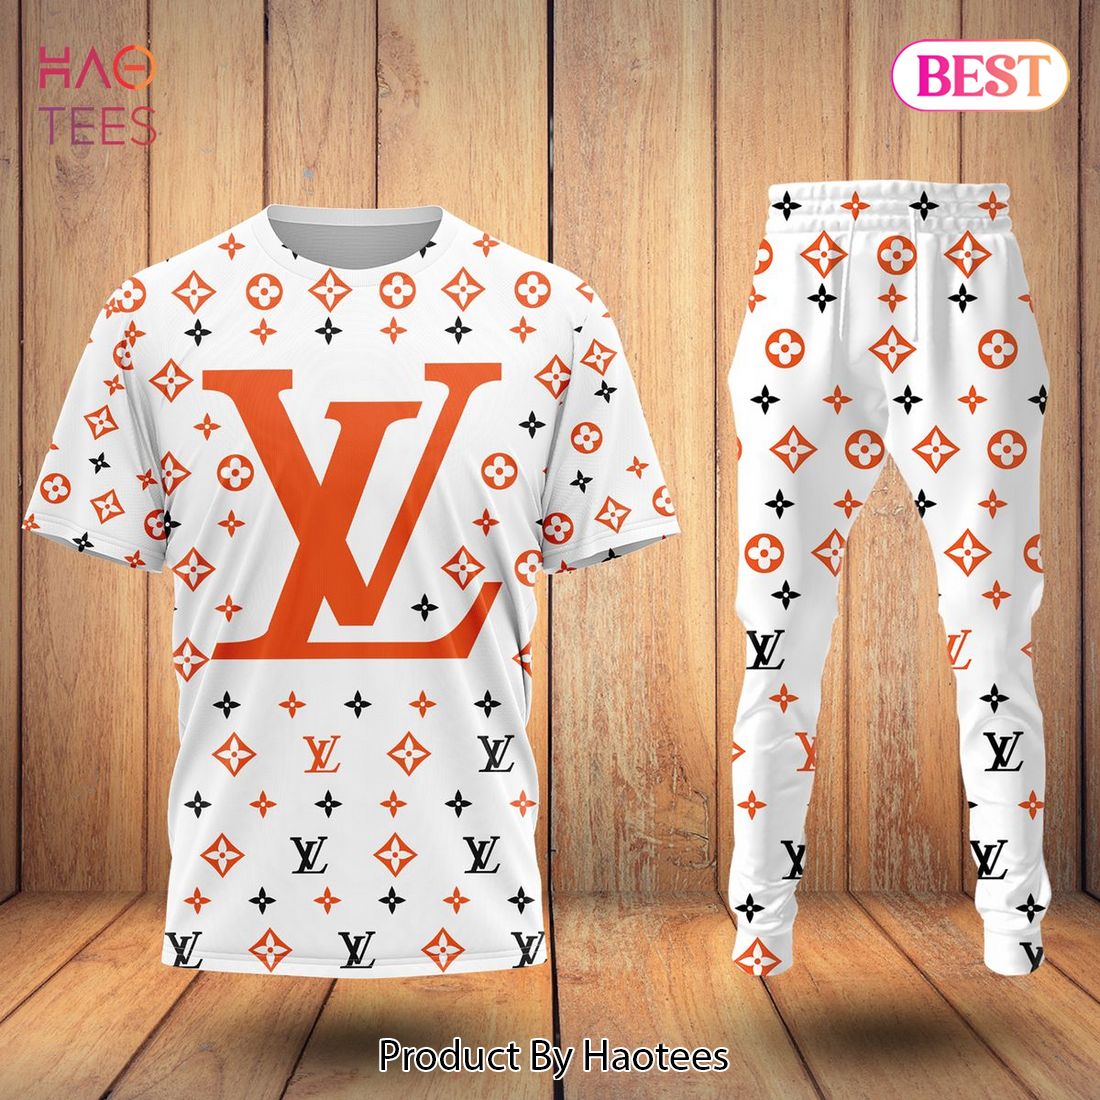 THE BEST Louis Vuitton Luxury Brand Orange Mix White T-Shirt And Pants All Over Printed